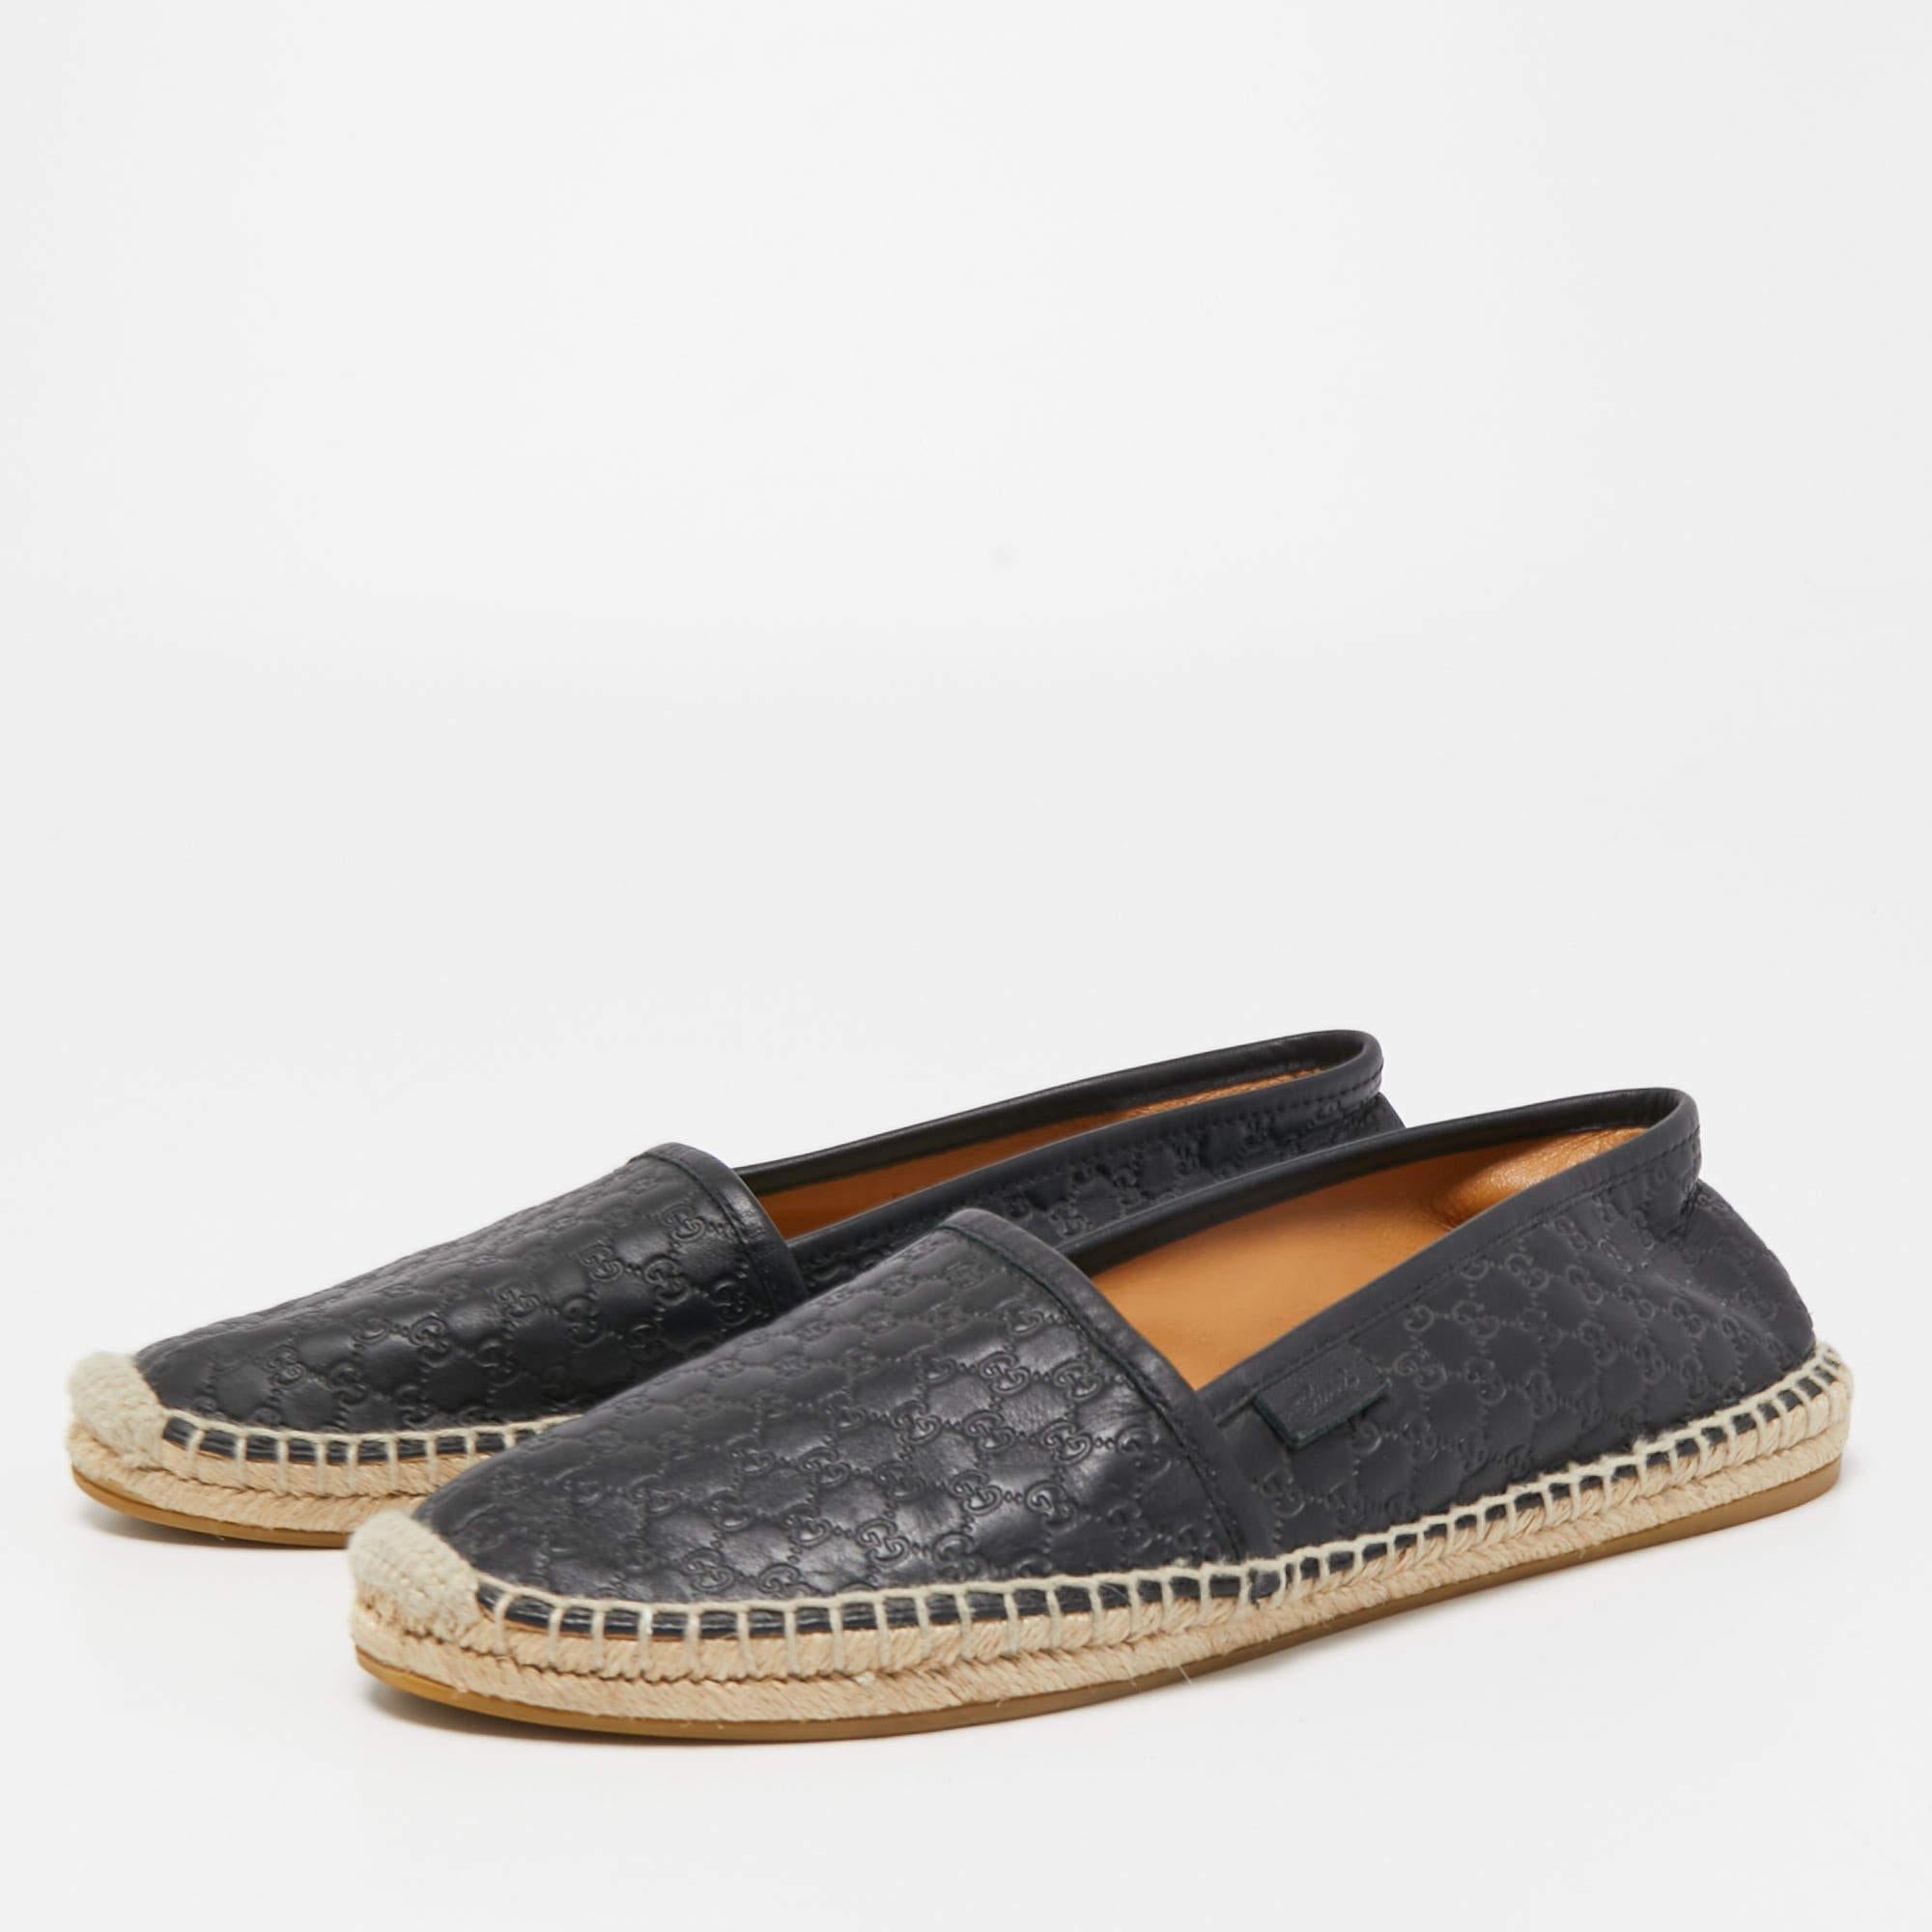 Let this comfortable pair be your first choice when you're out for a long day. These Gucci espadrilles have well-sewn uppers beautifully set on durable soles.

